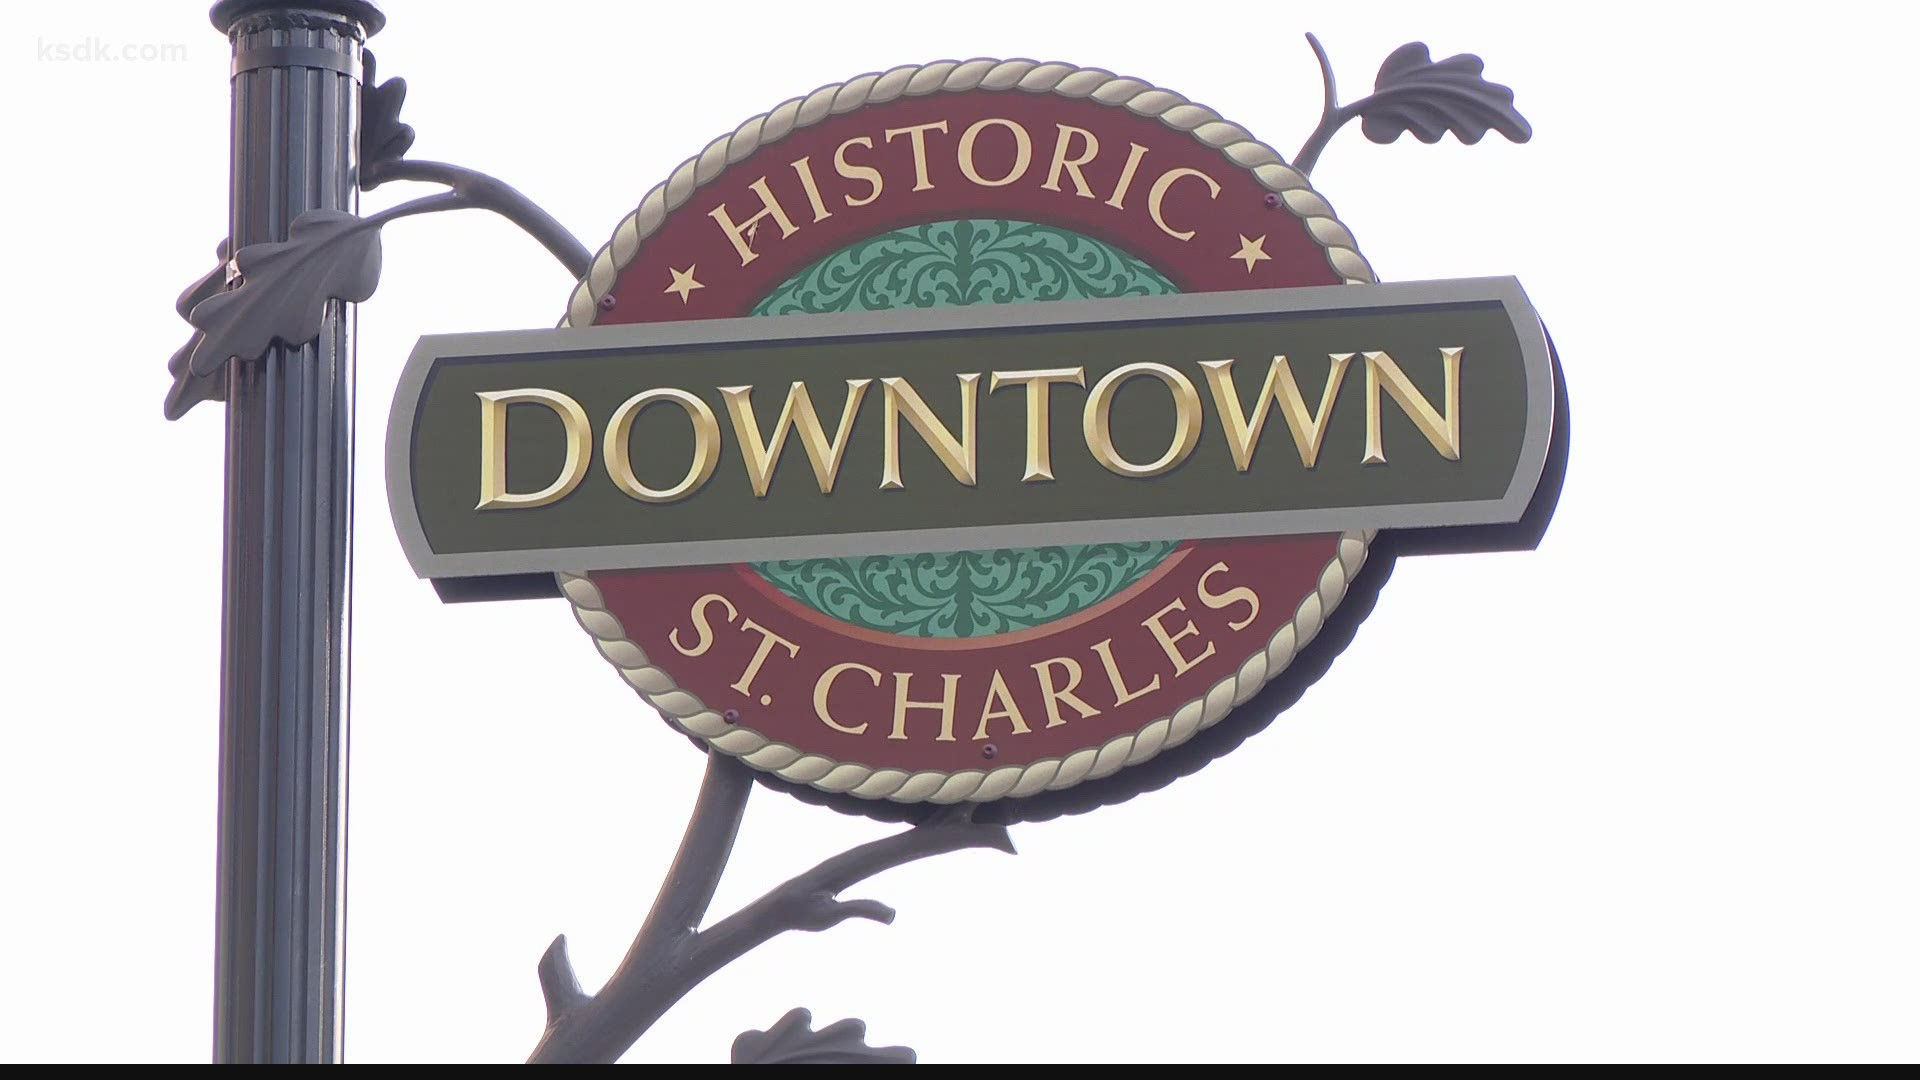 Main Street St. Charles will be a lot calmer around 11 PM, at least that it is what city leaders hope